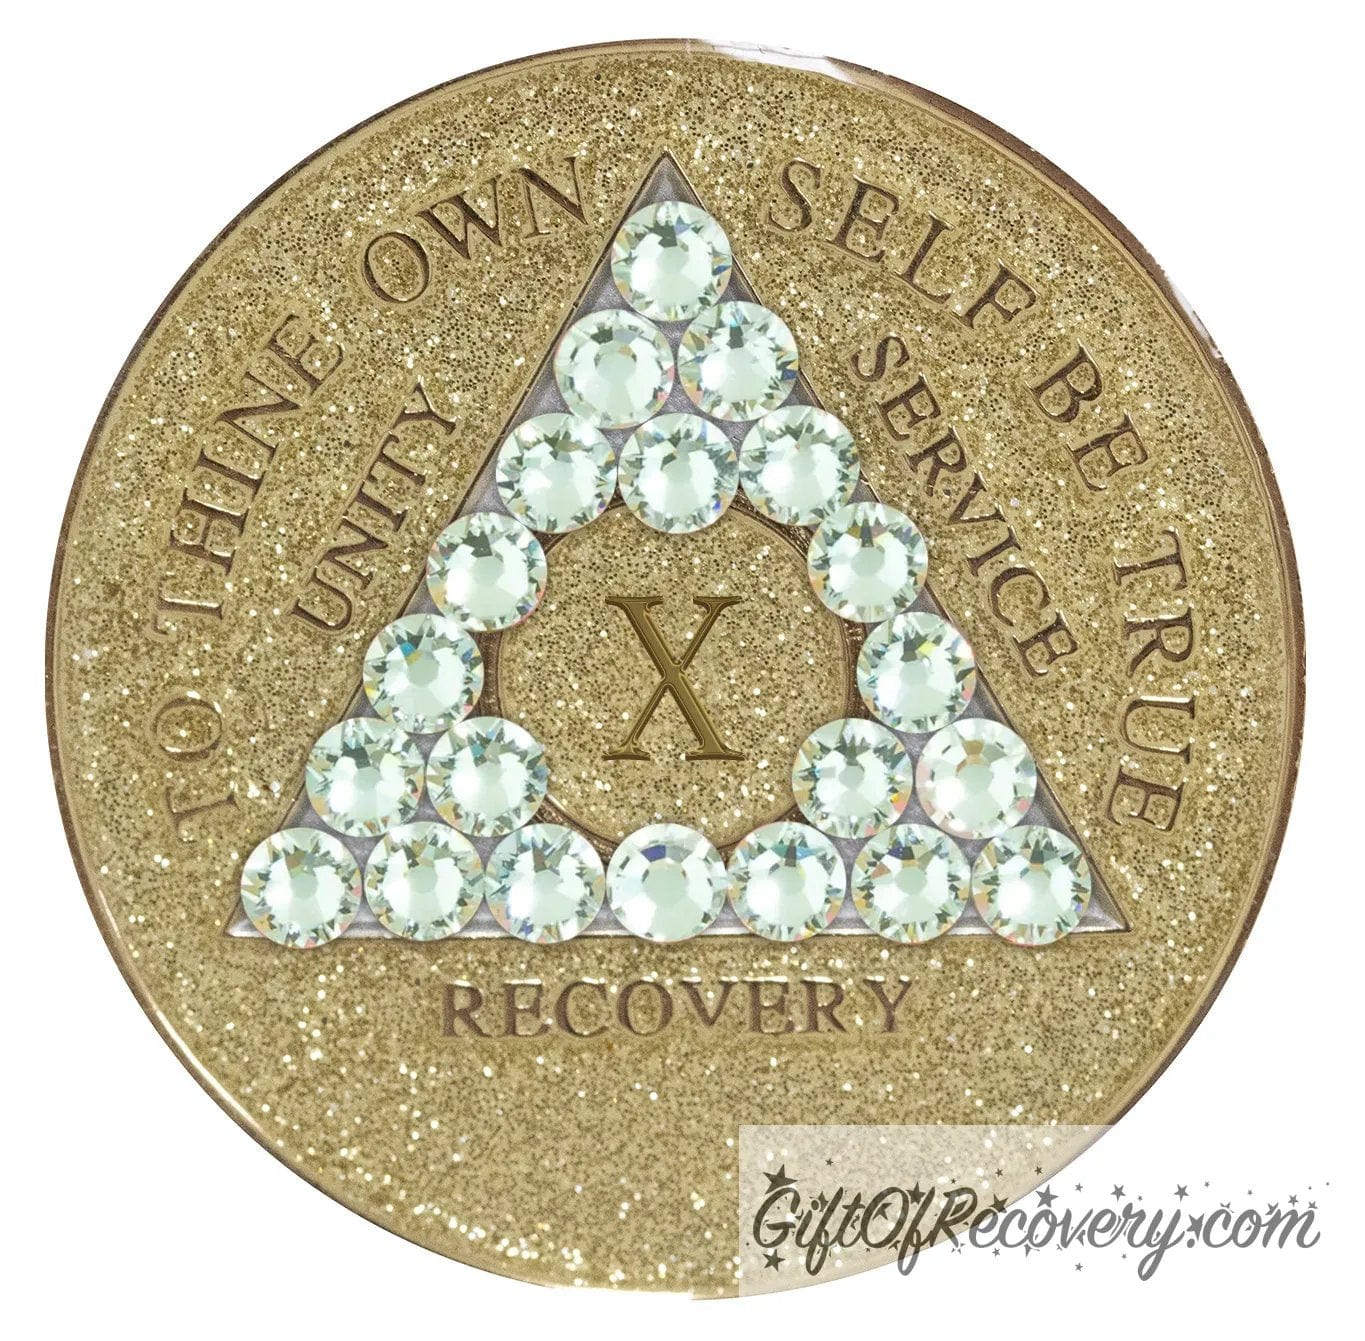 10 year AA medallion in gold glitter with twenty-one genuine diamond CZ crystals in the shape of a triangle, symbolizing transformation under pressure, to thine own self be true, unity, service, recovery and roman numeral are embossed with 14k gold-plated brass along with outer rim, sealed in a chip and scratch-resistant resin giving it a beautiful glossy look.